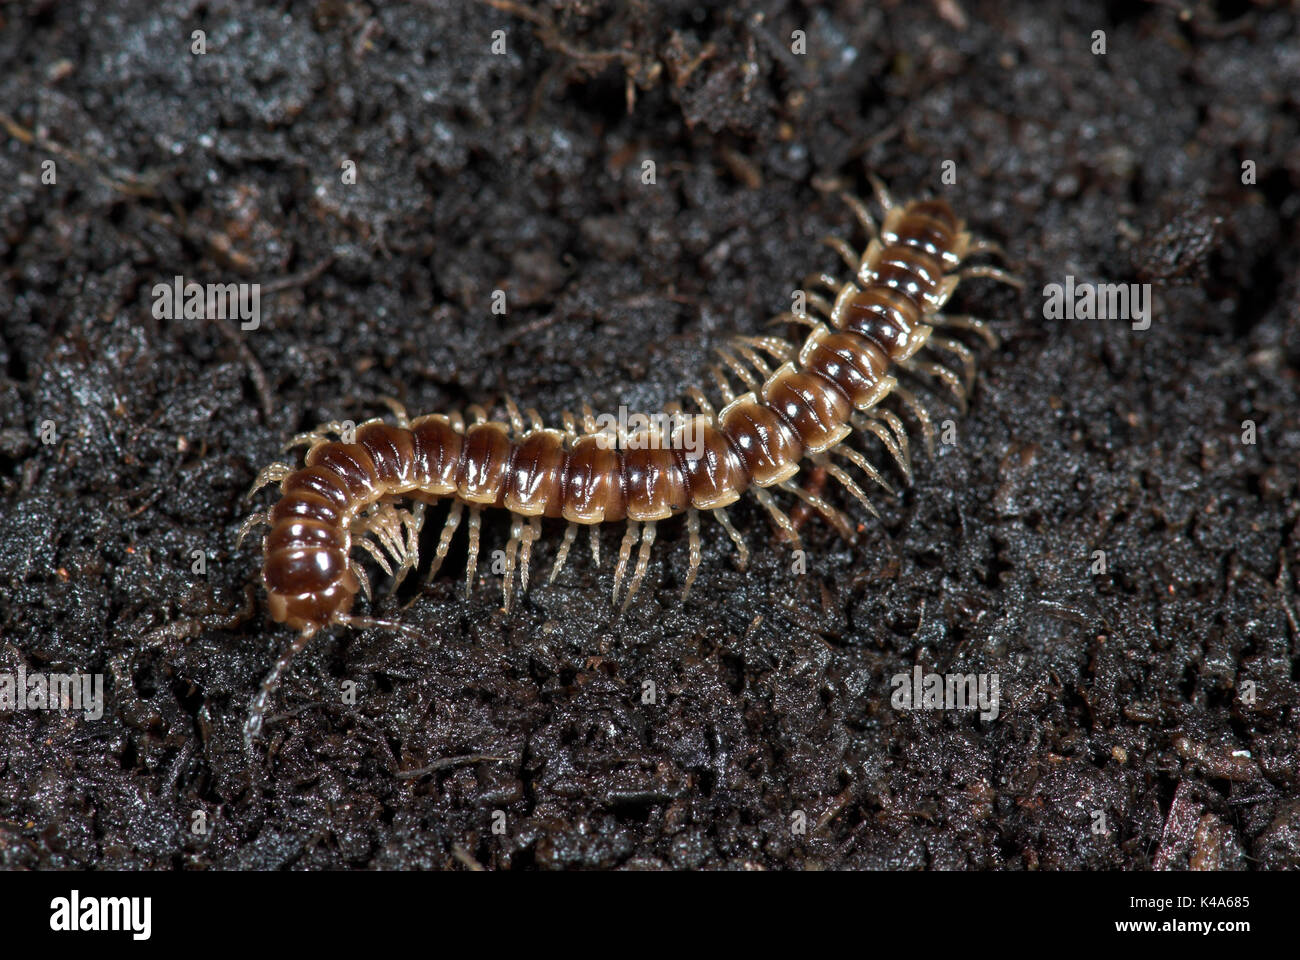 Flat Backed Millipede, Polydesmus angustus, on earth and leaf litter, garden Stock Photo